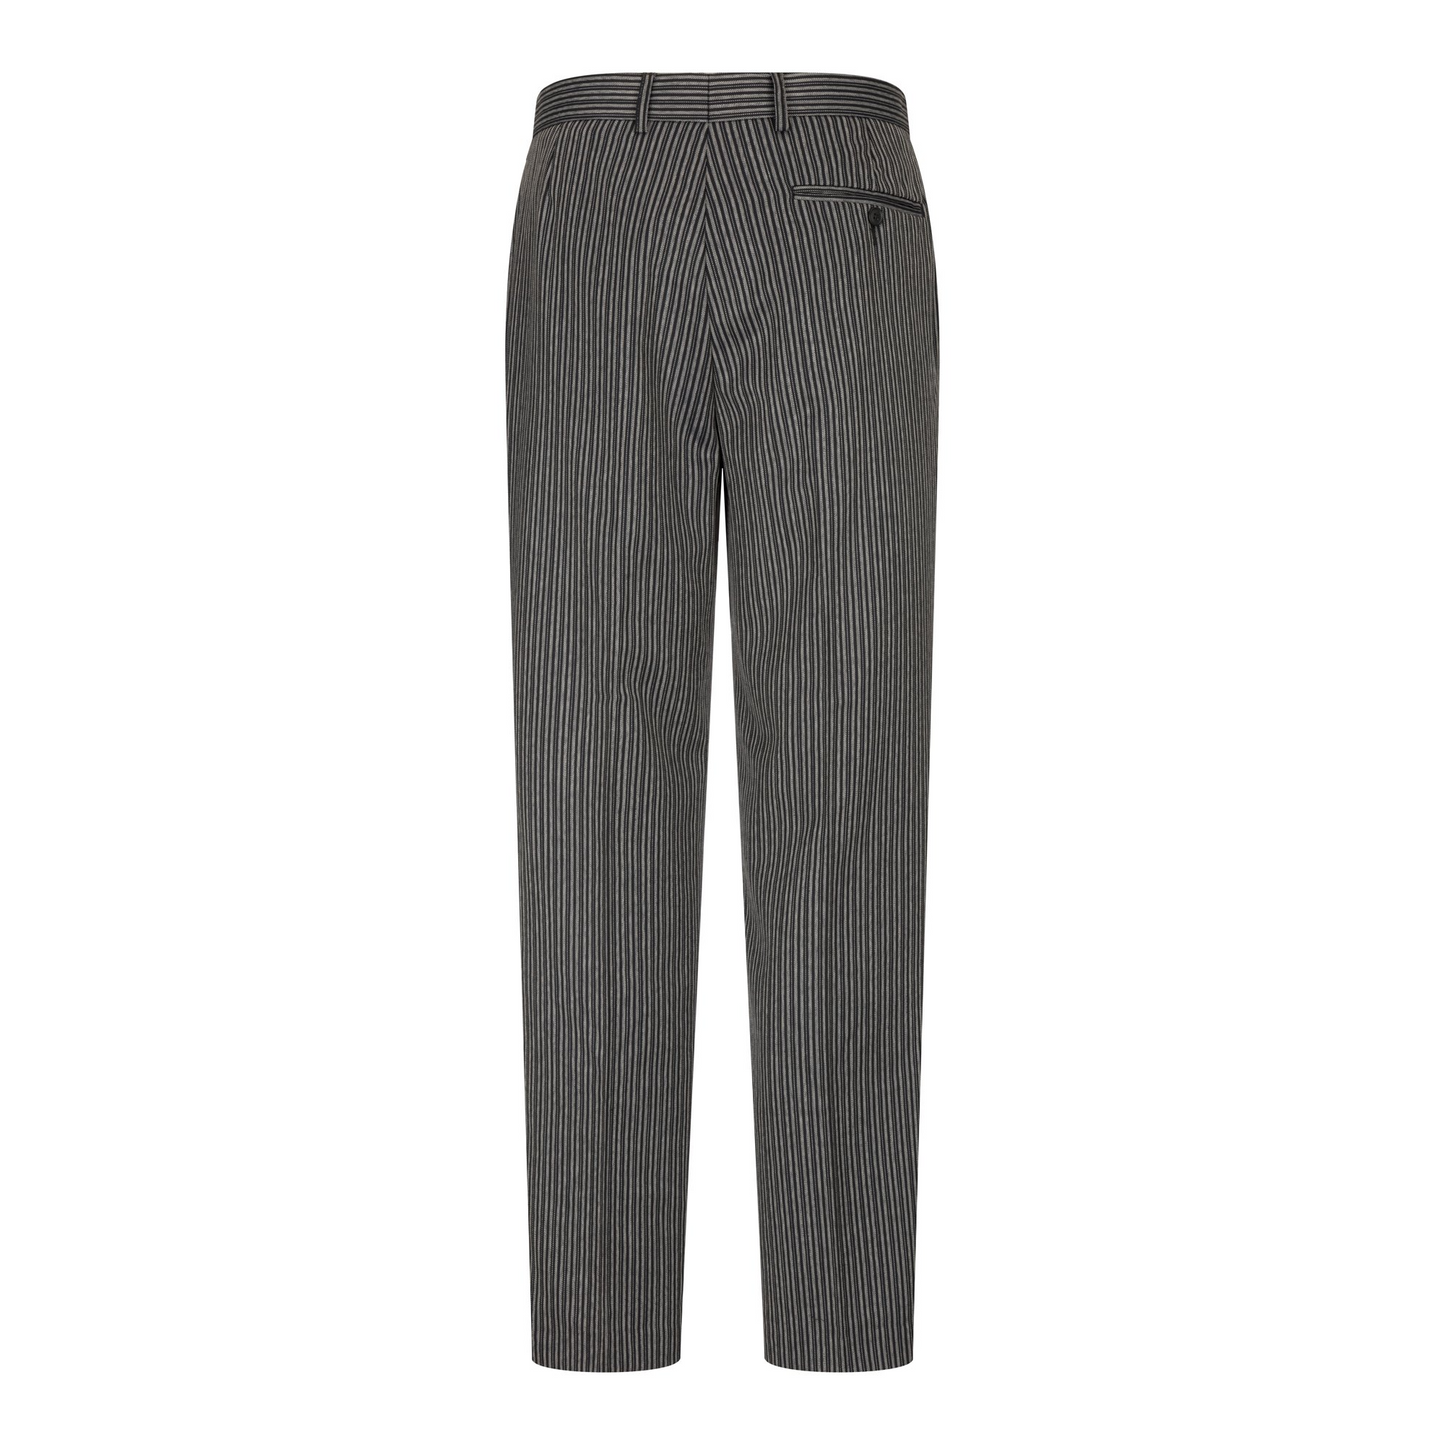 Men's Pinstripe Morning Trousers with Black & Grey Stripe - New ...